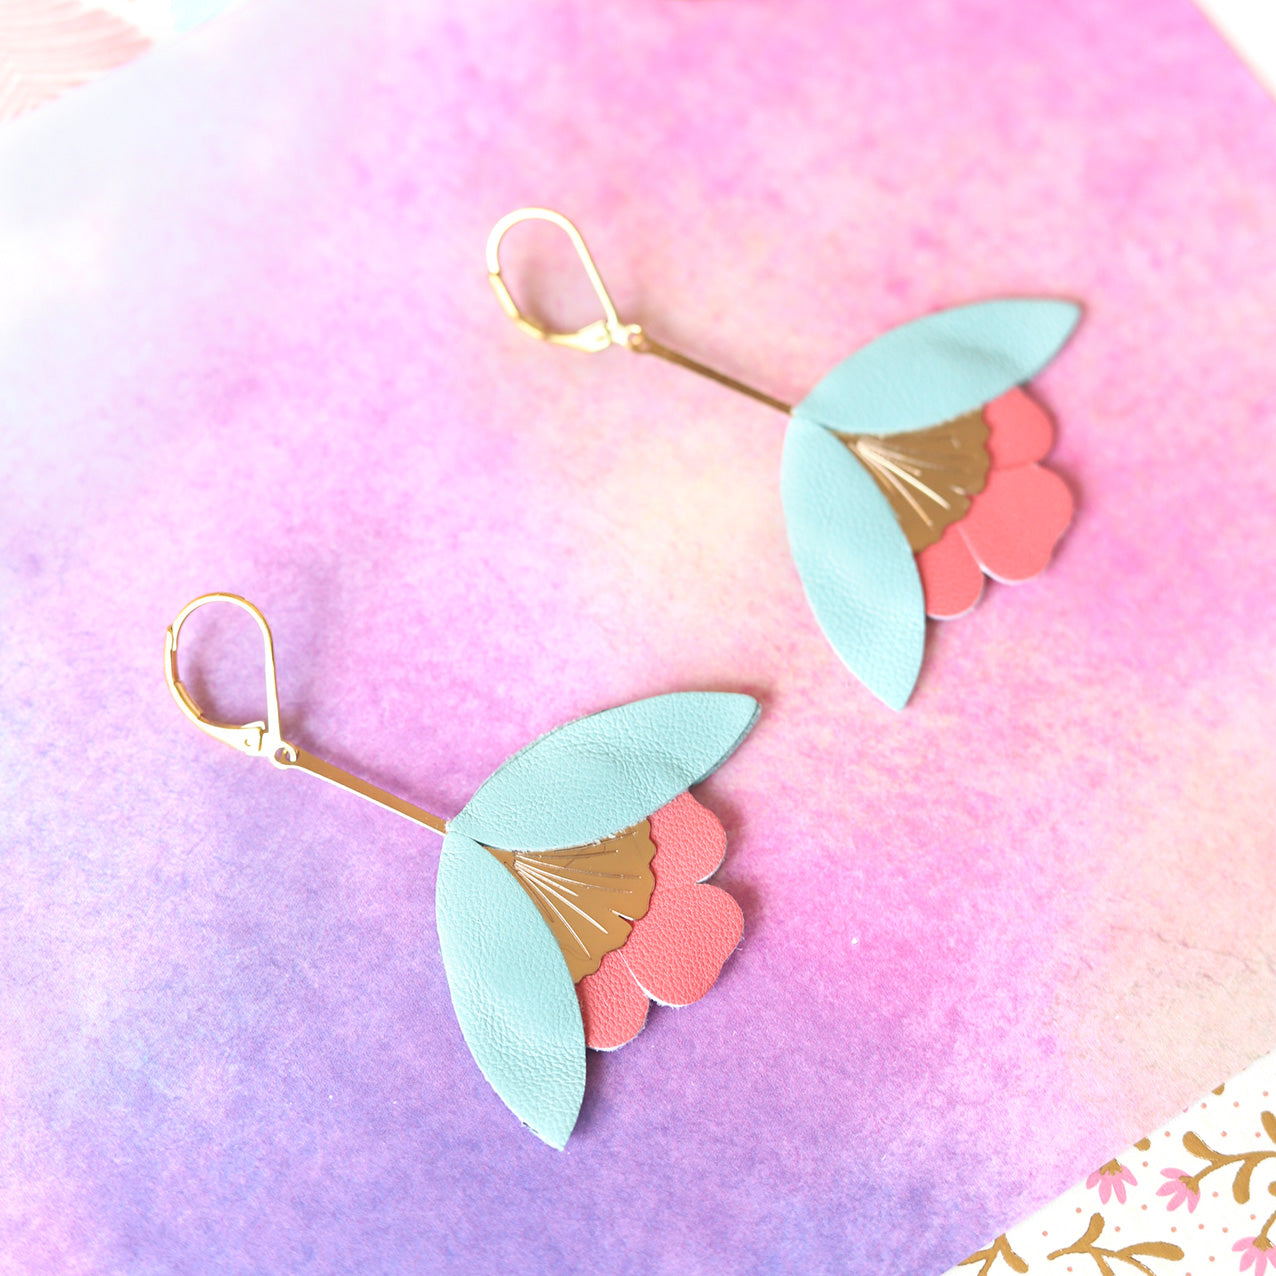 Ginkgo Flower earrings in aquamarine blue and dahlia pink leather